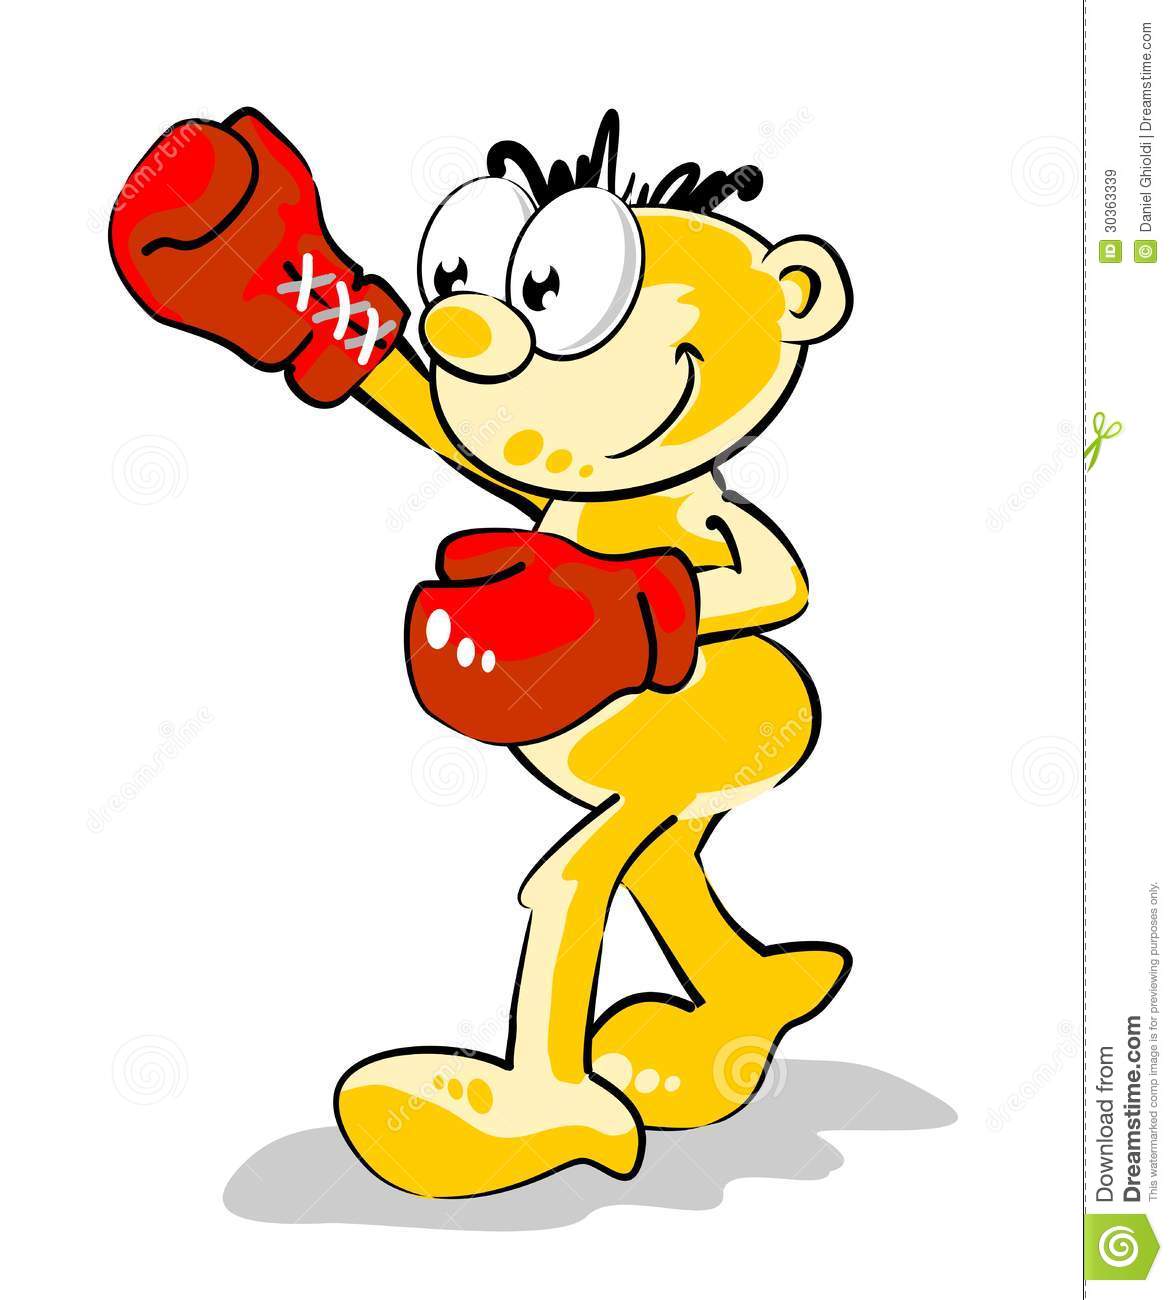 Boxing Champion Royalty Free Stock Images   Image  30363339